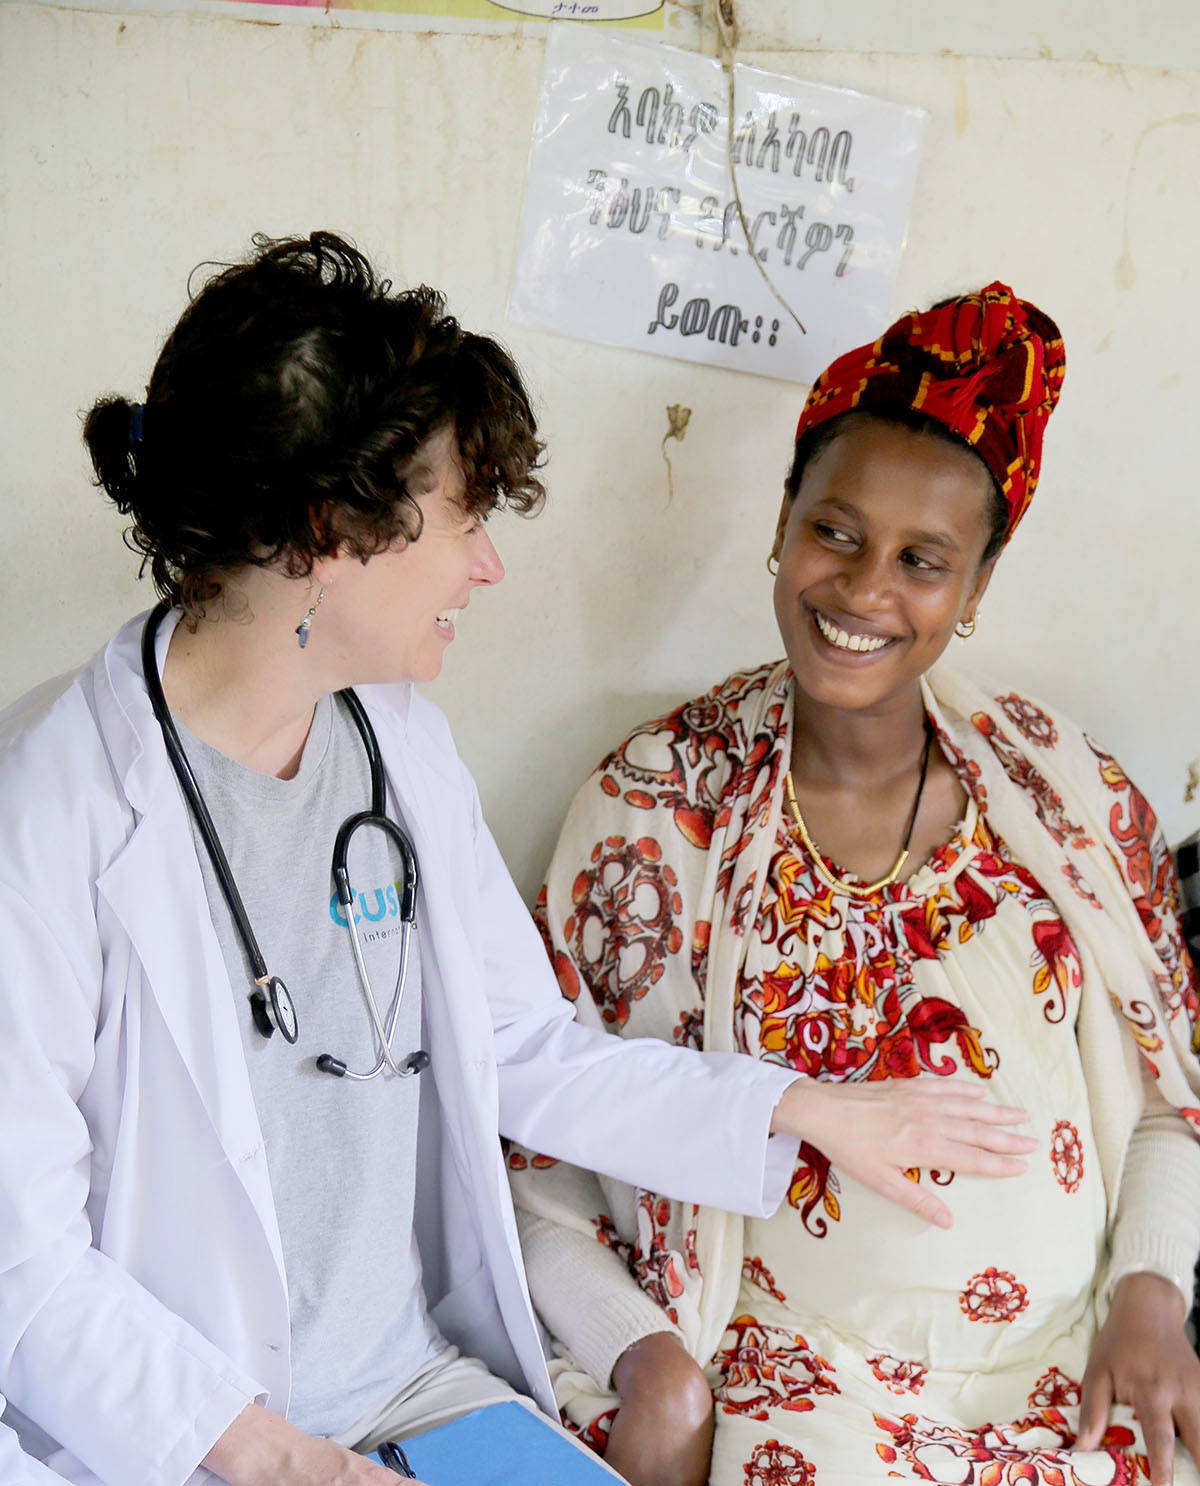 Canadian midwife’s experiences in Ethiopia eye-opening